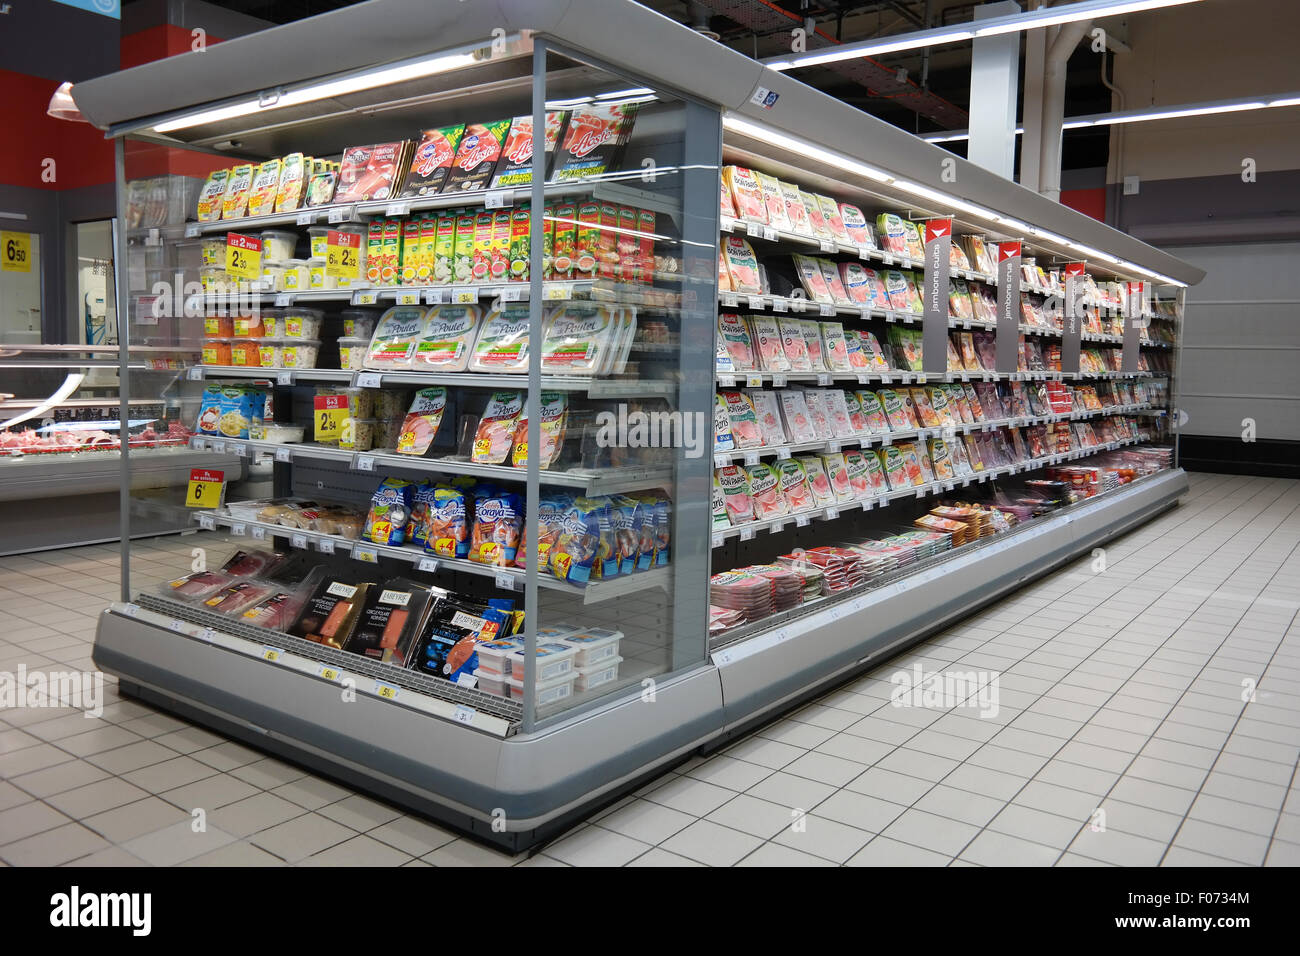 https://c8.alamy.com/comp/F0734M/refrigerator-filled-with-processed-meat-products-of-a-carrefour-supermarket-F0734M.jpg